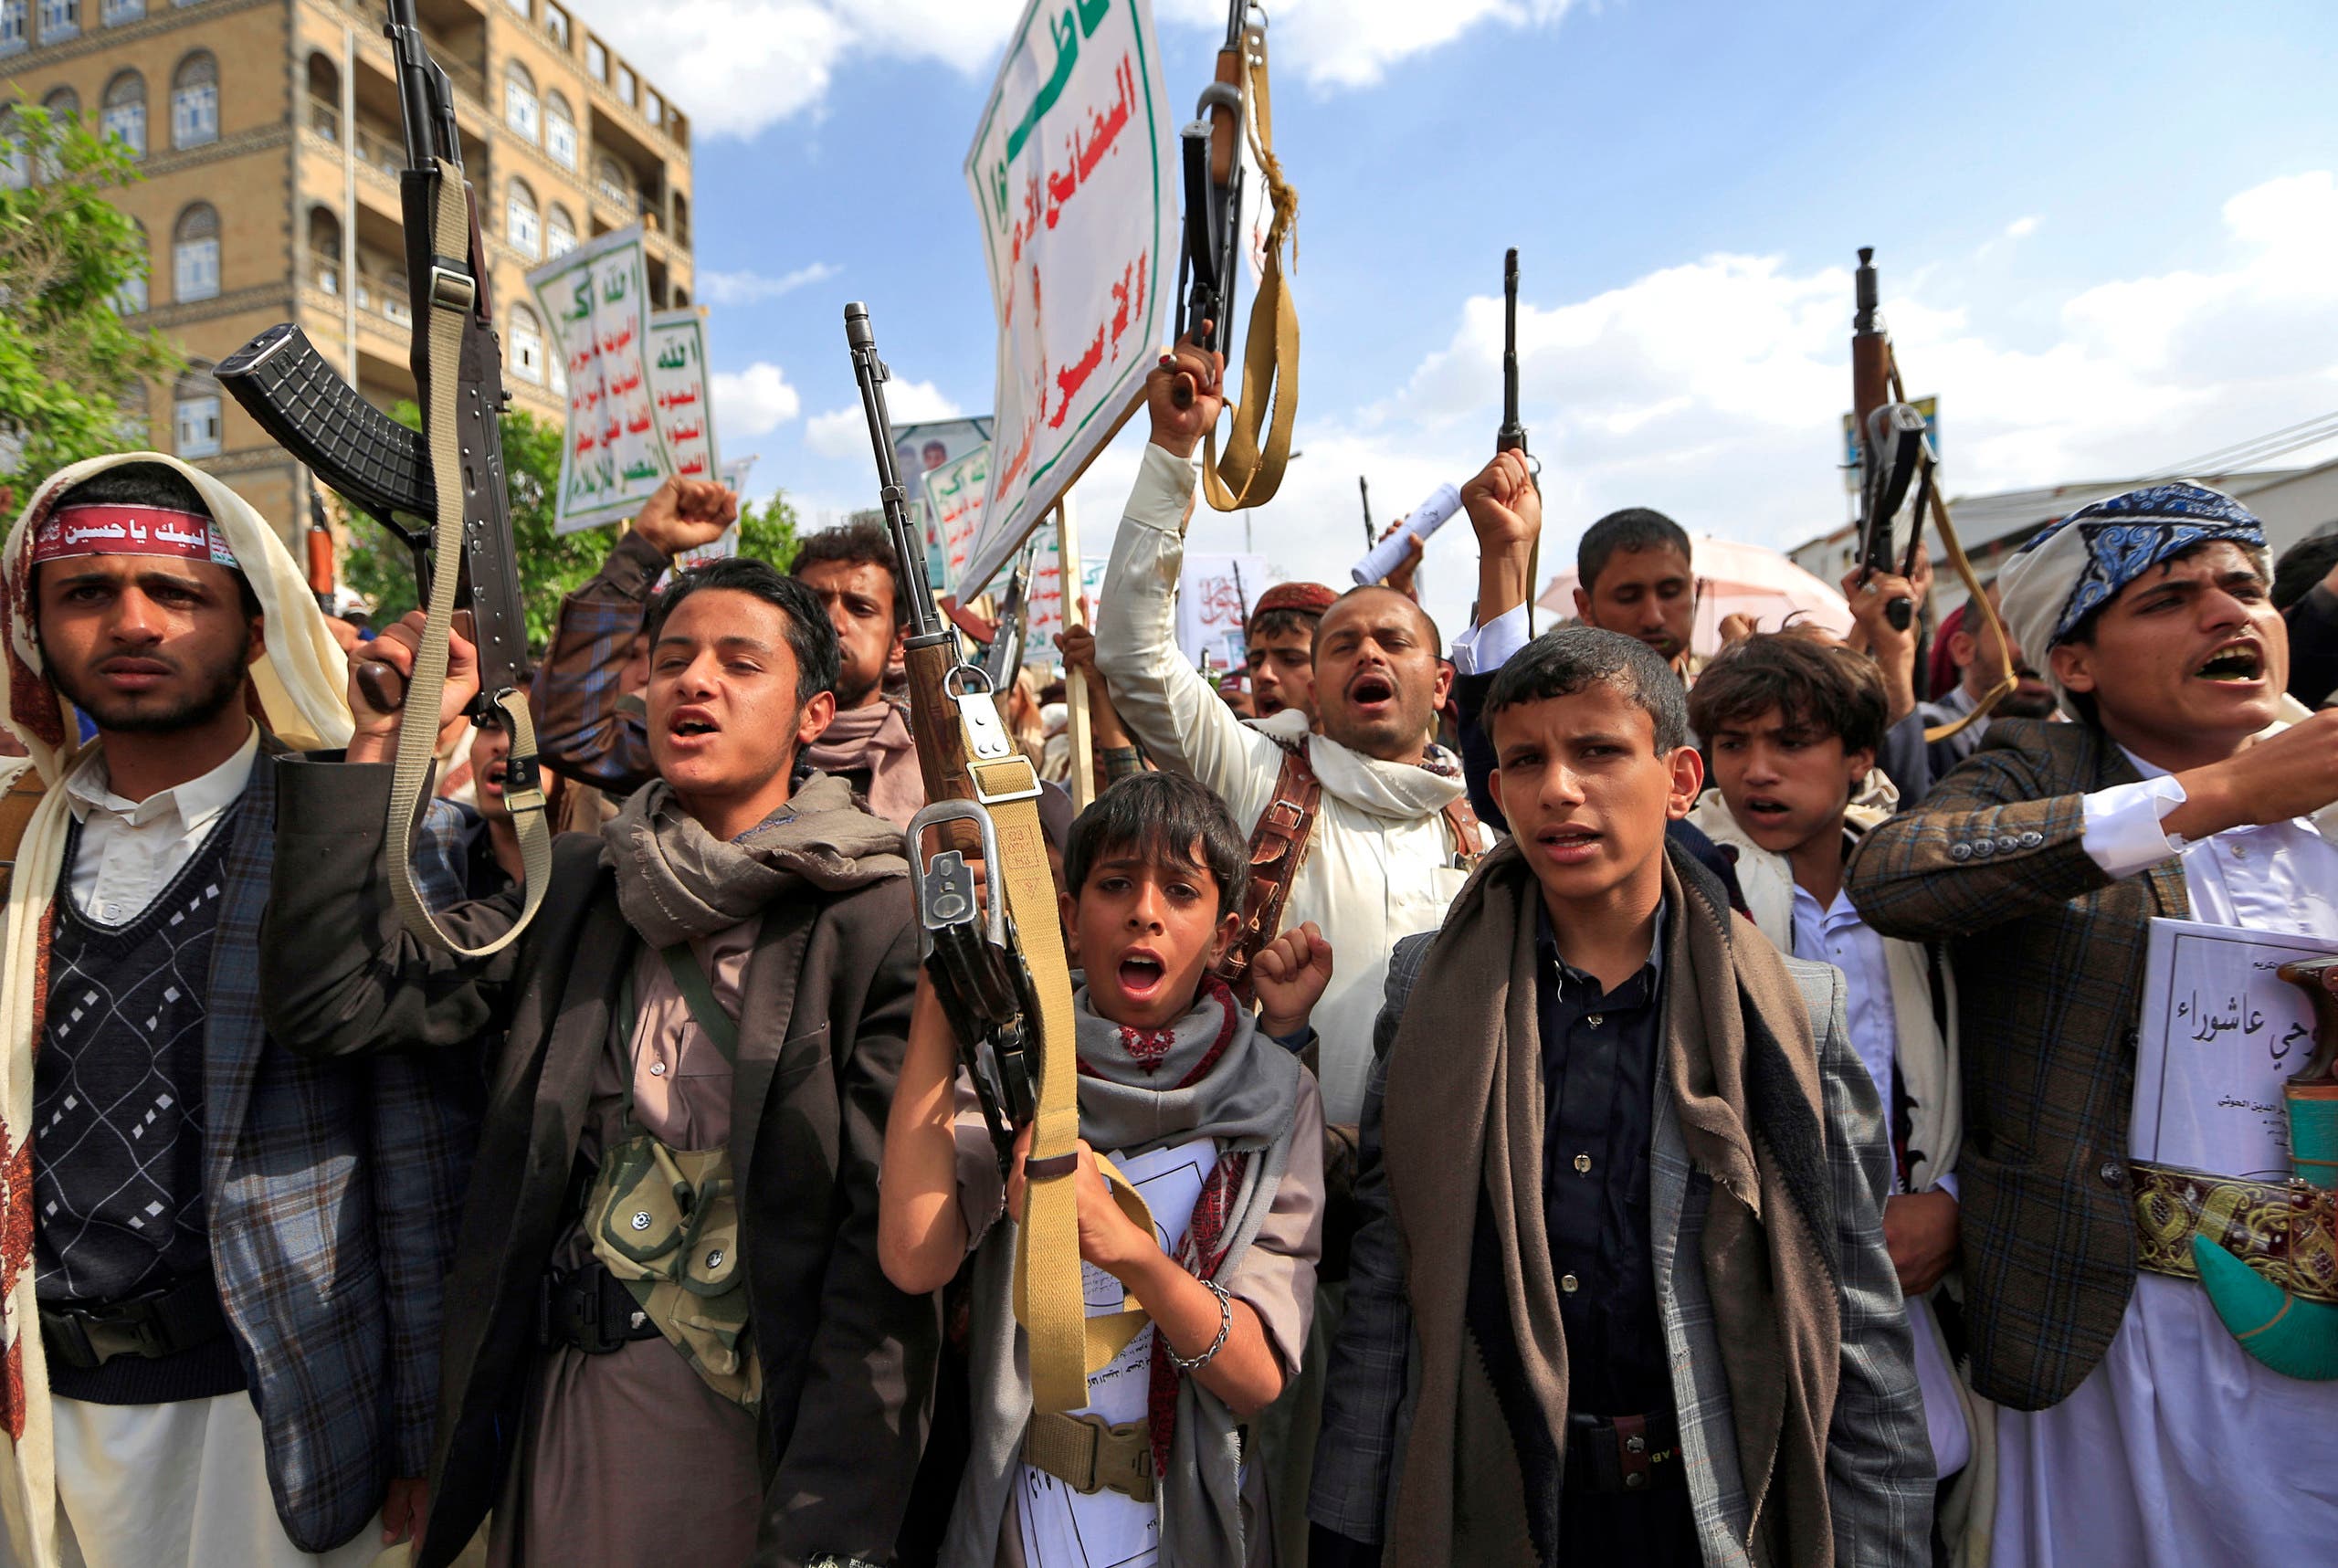 Al-Eryani: The Houthis use children to carry weapons and ammunition